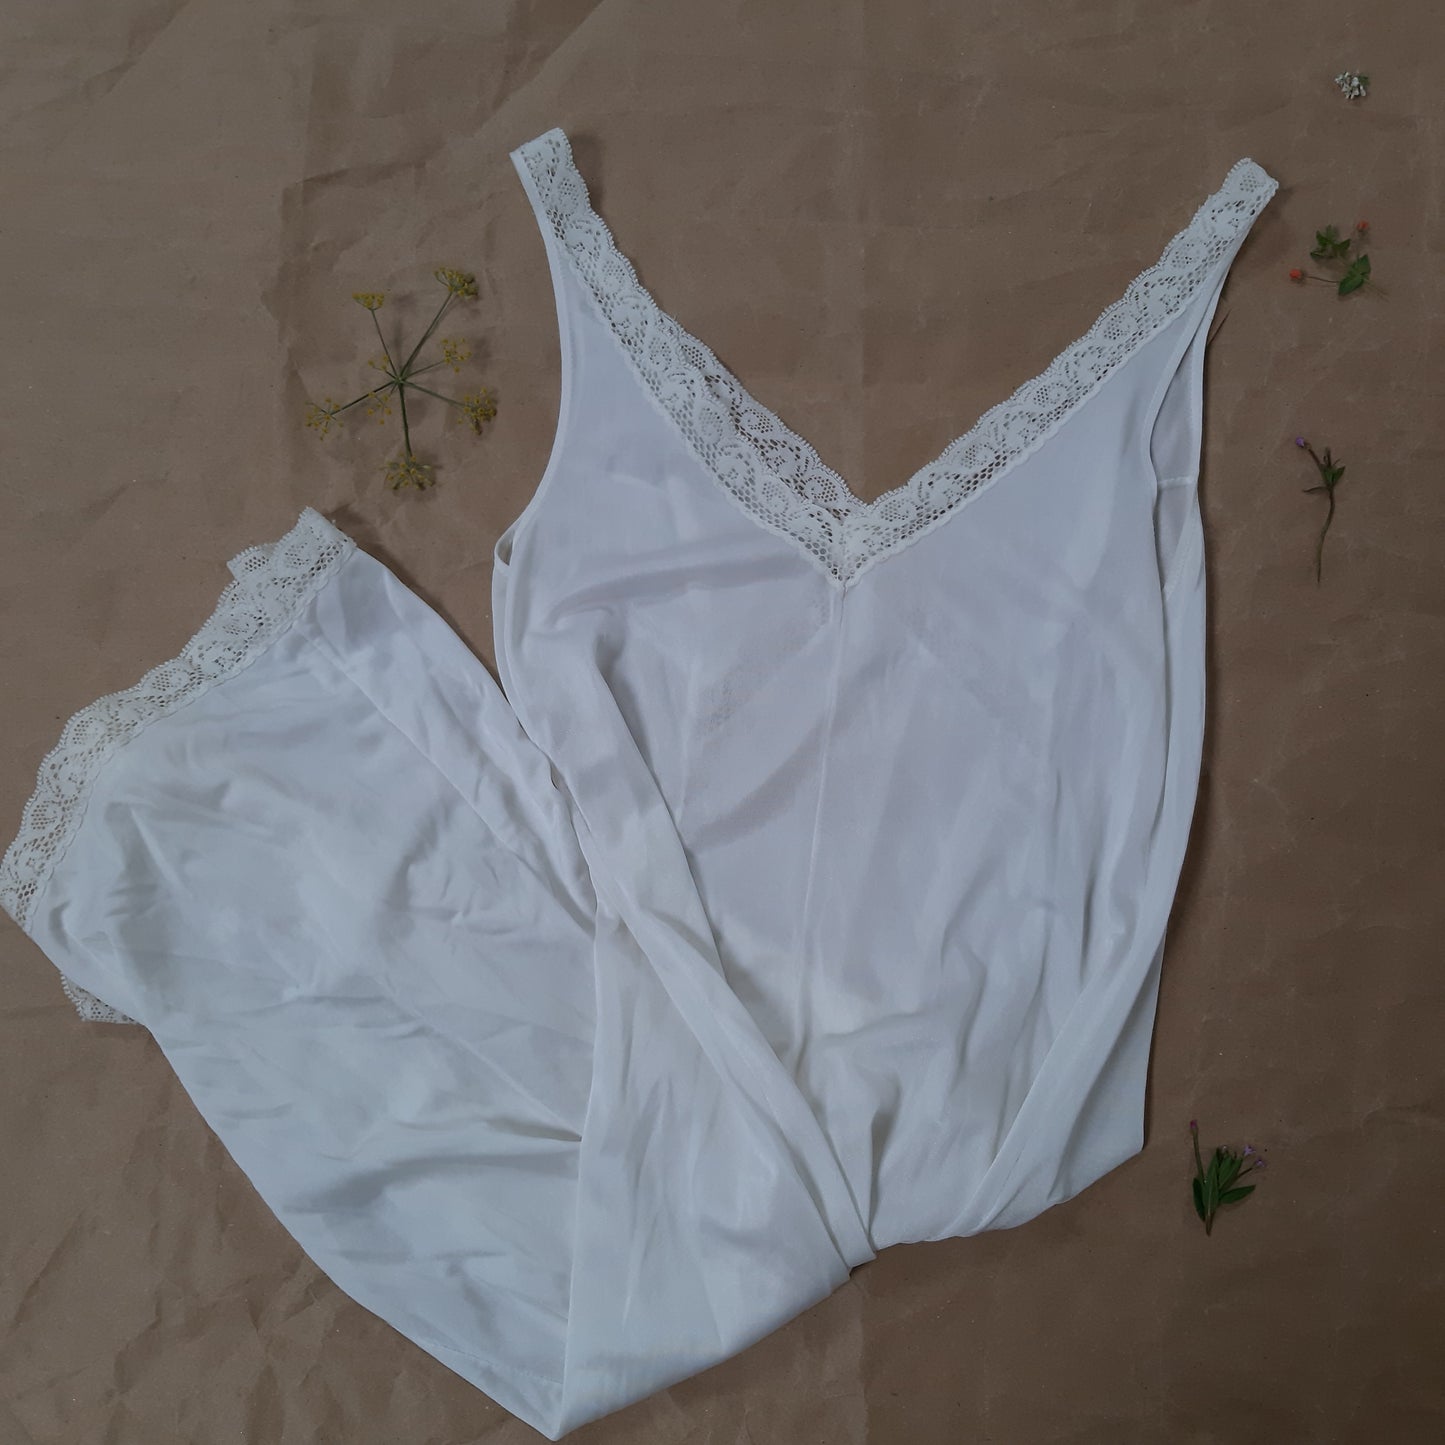 White slip with cross lace pattern